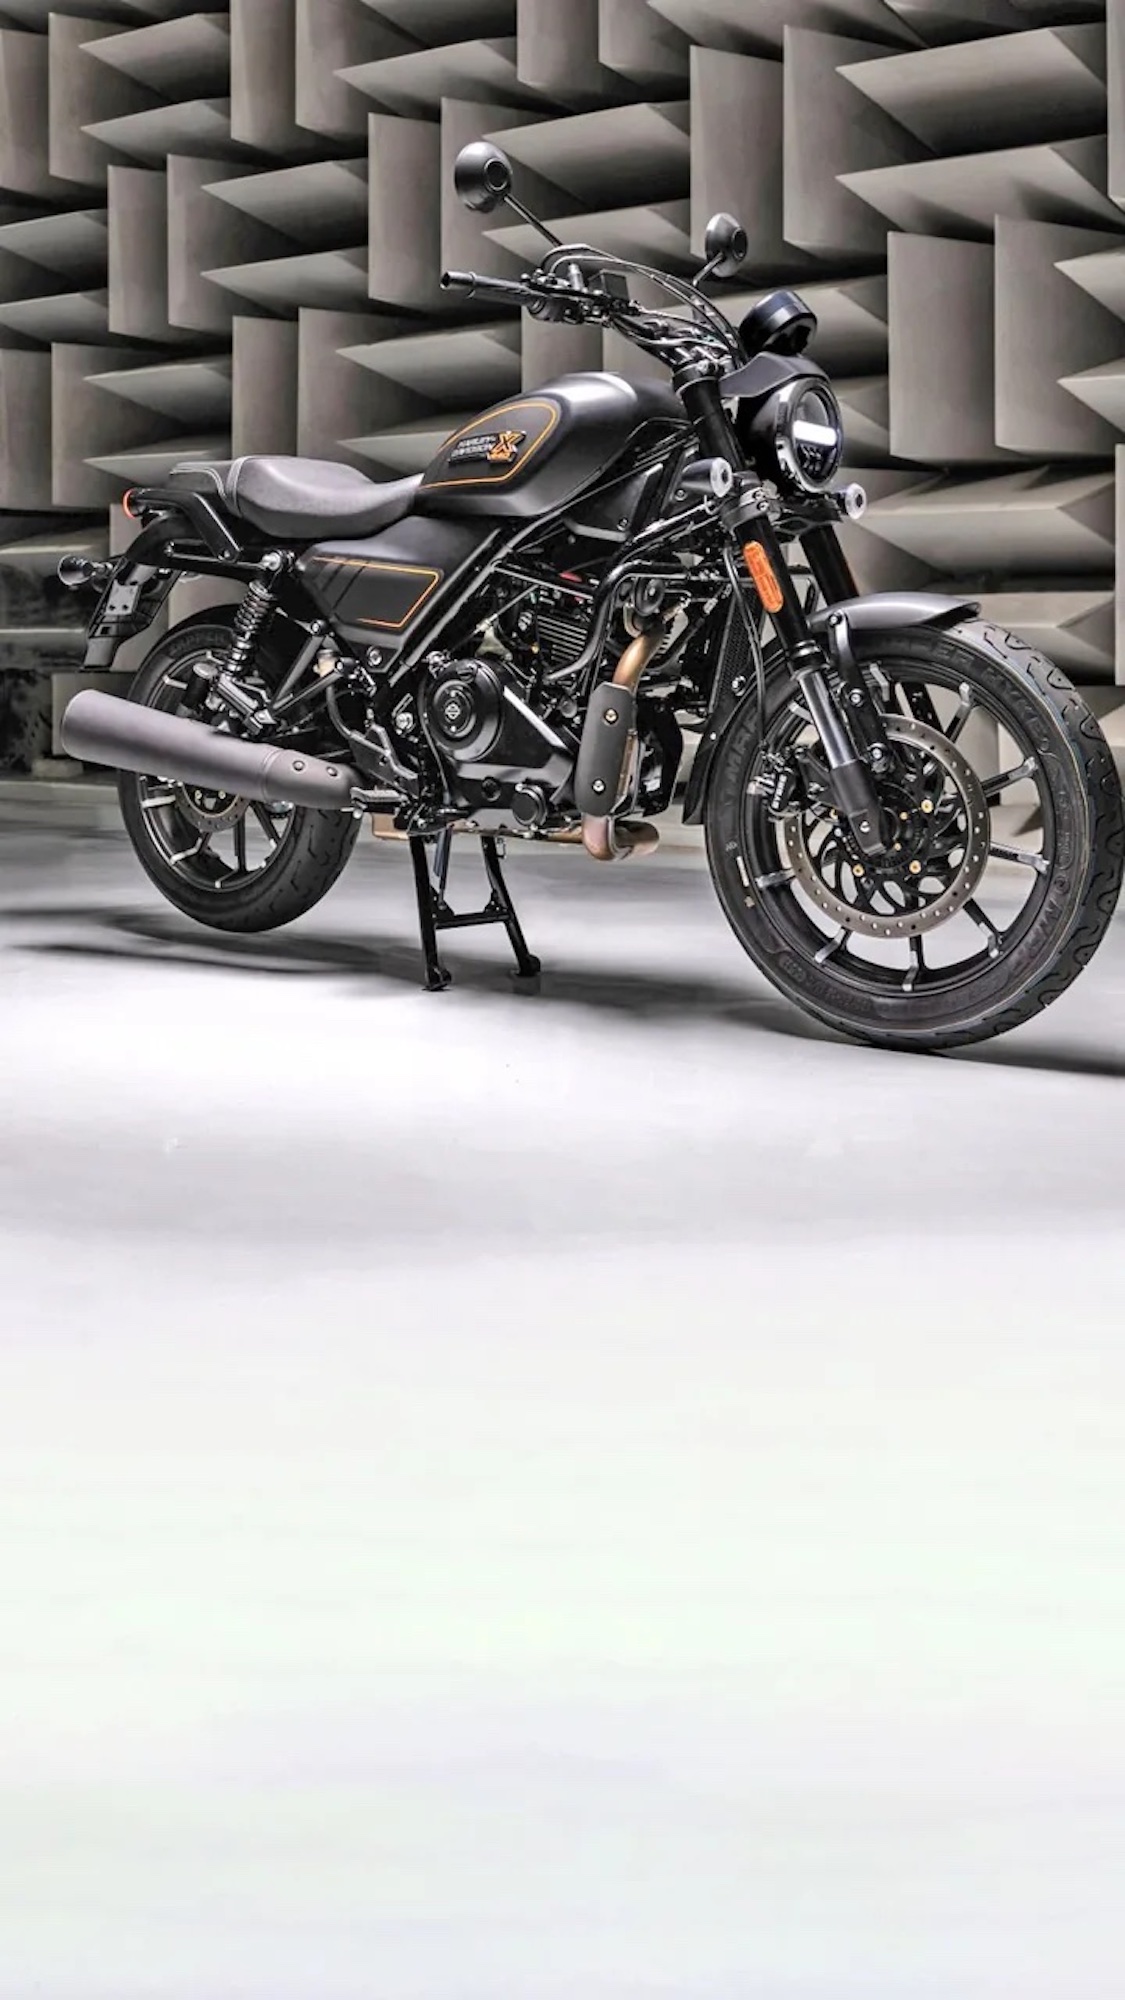 A view of the Harley X Hero bike. Media sourced from Mashable.